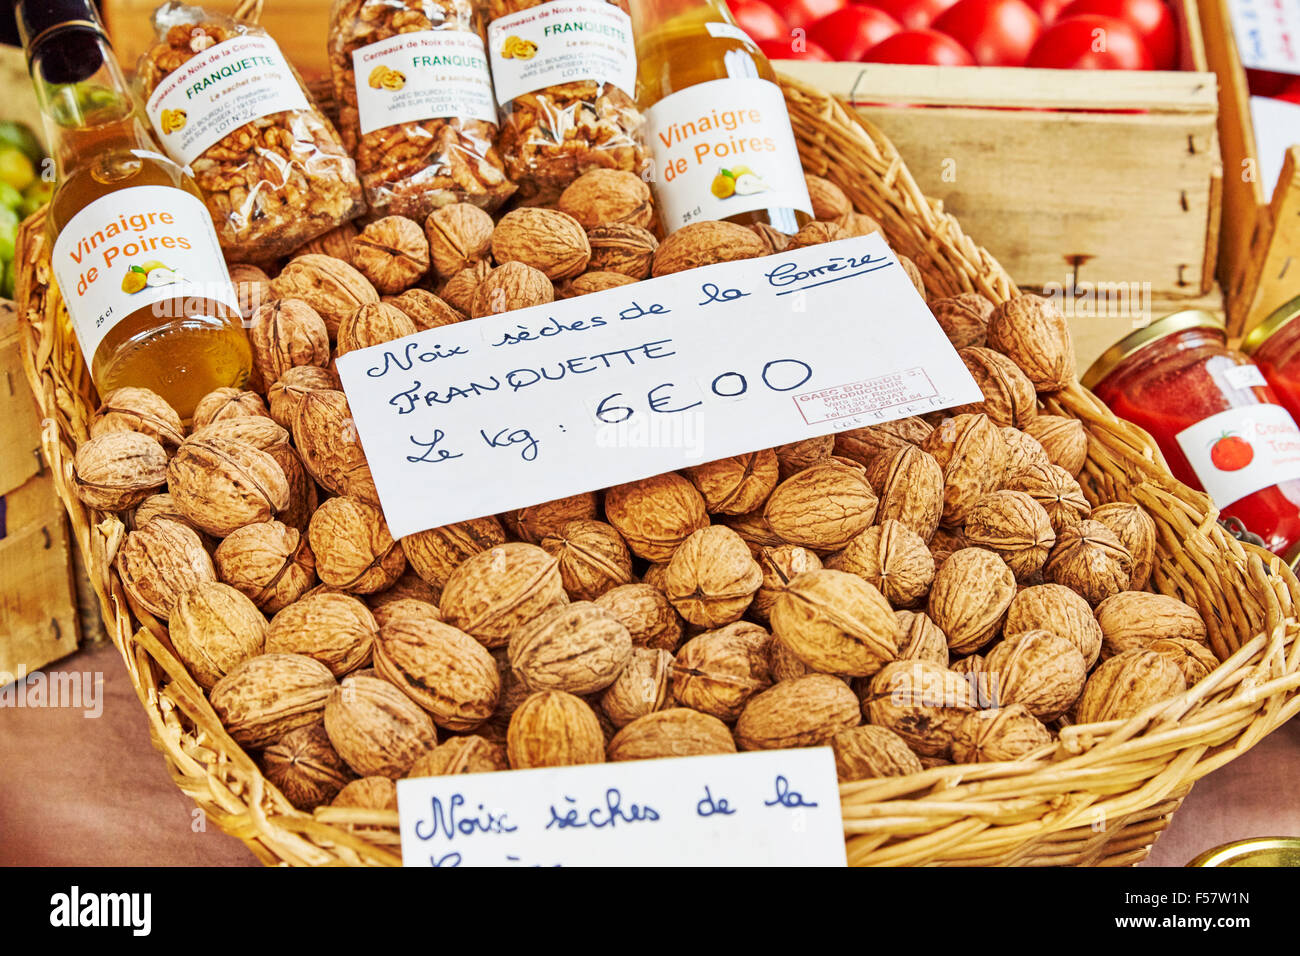 walnuts for sale on a street market stall in Objat, France. Stock Photo